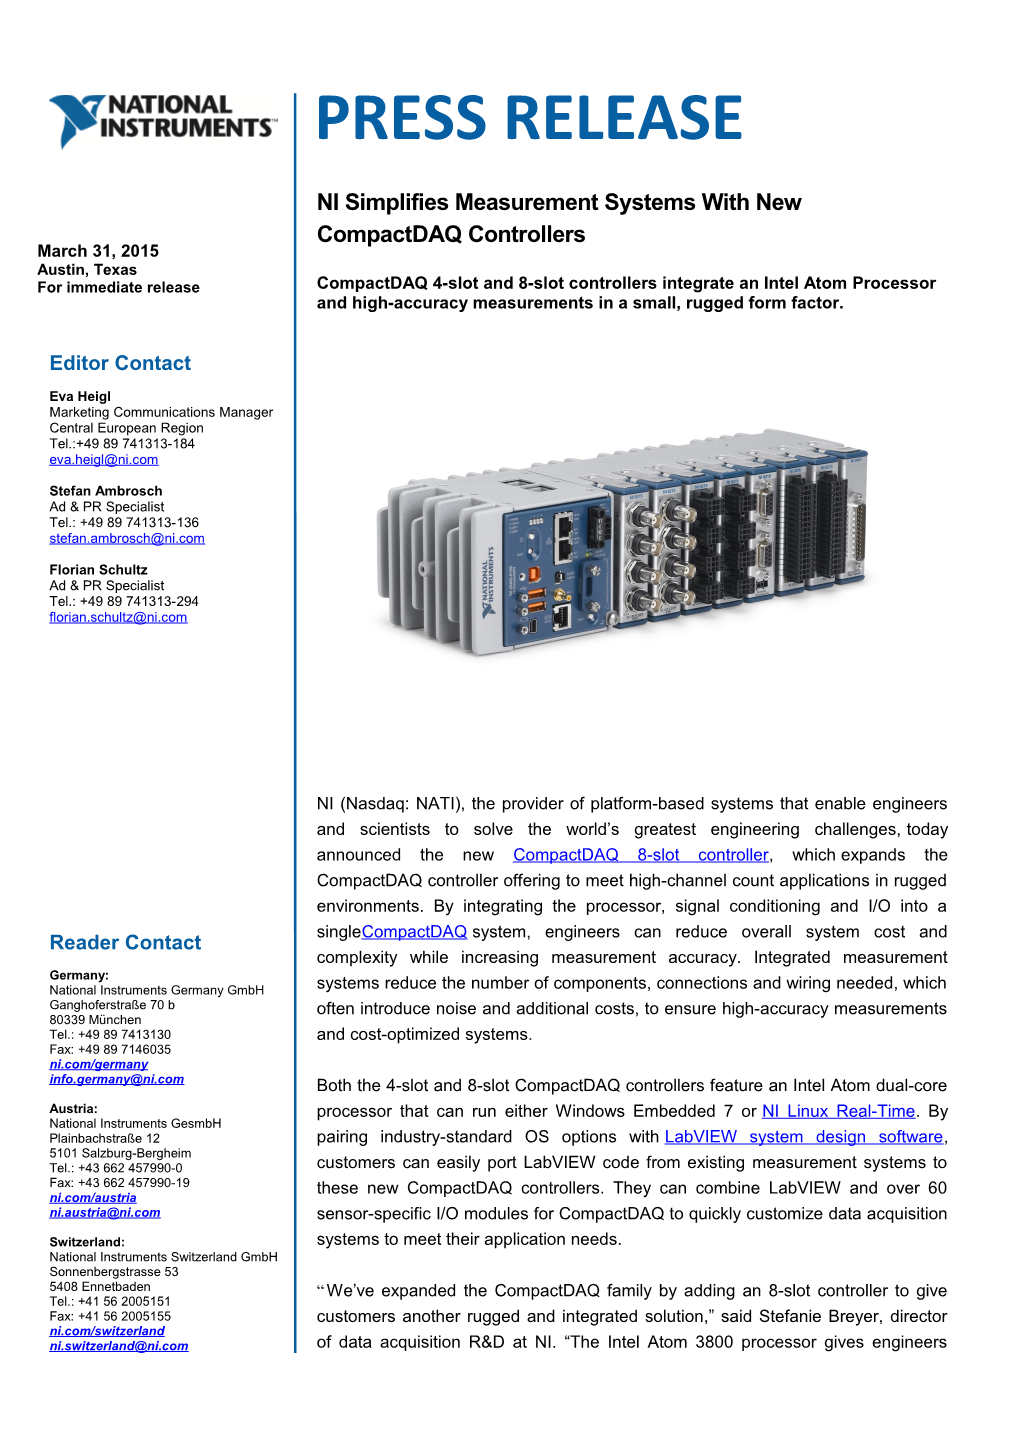 Compactdaq 4-Slot and 8-Slot Controllers Integrate an Intel Atom Processor and High-Accuracy